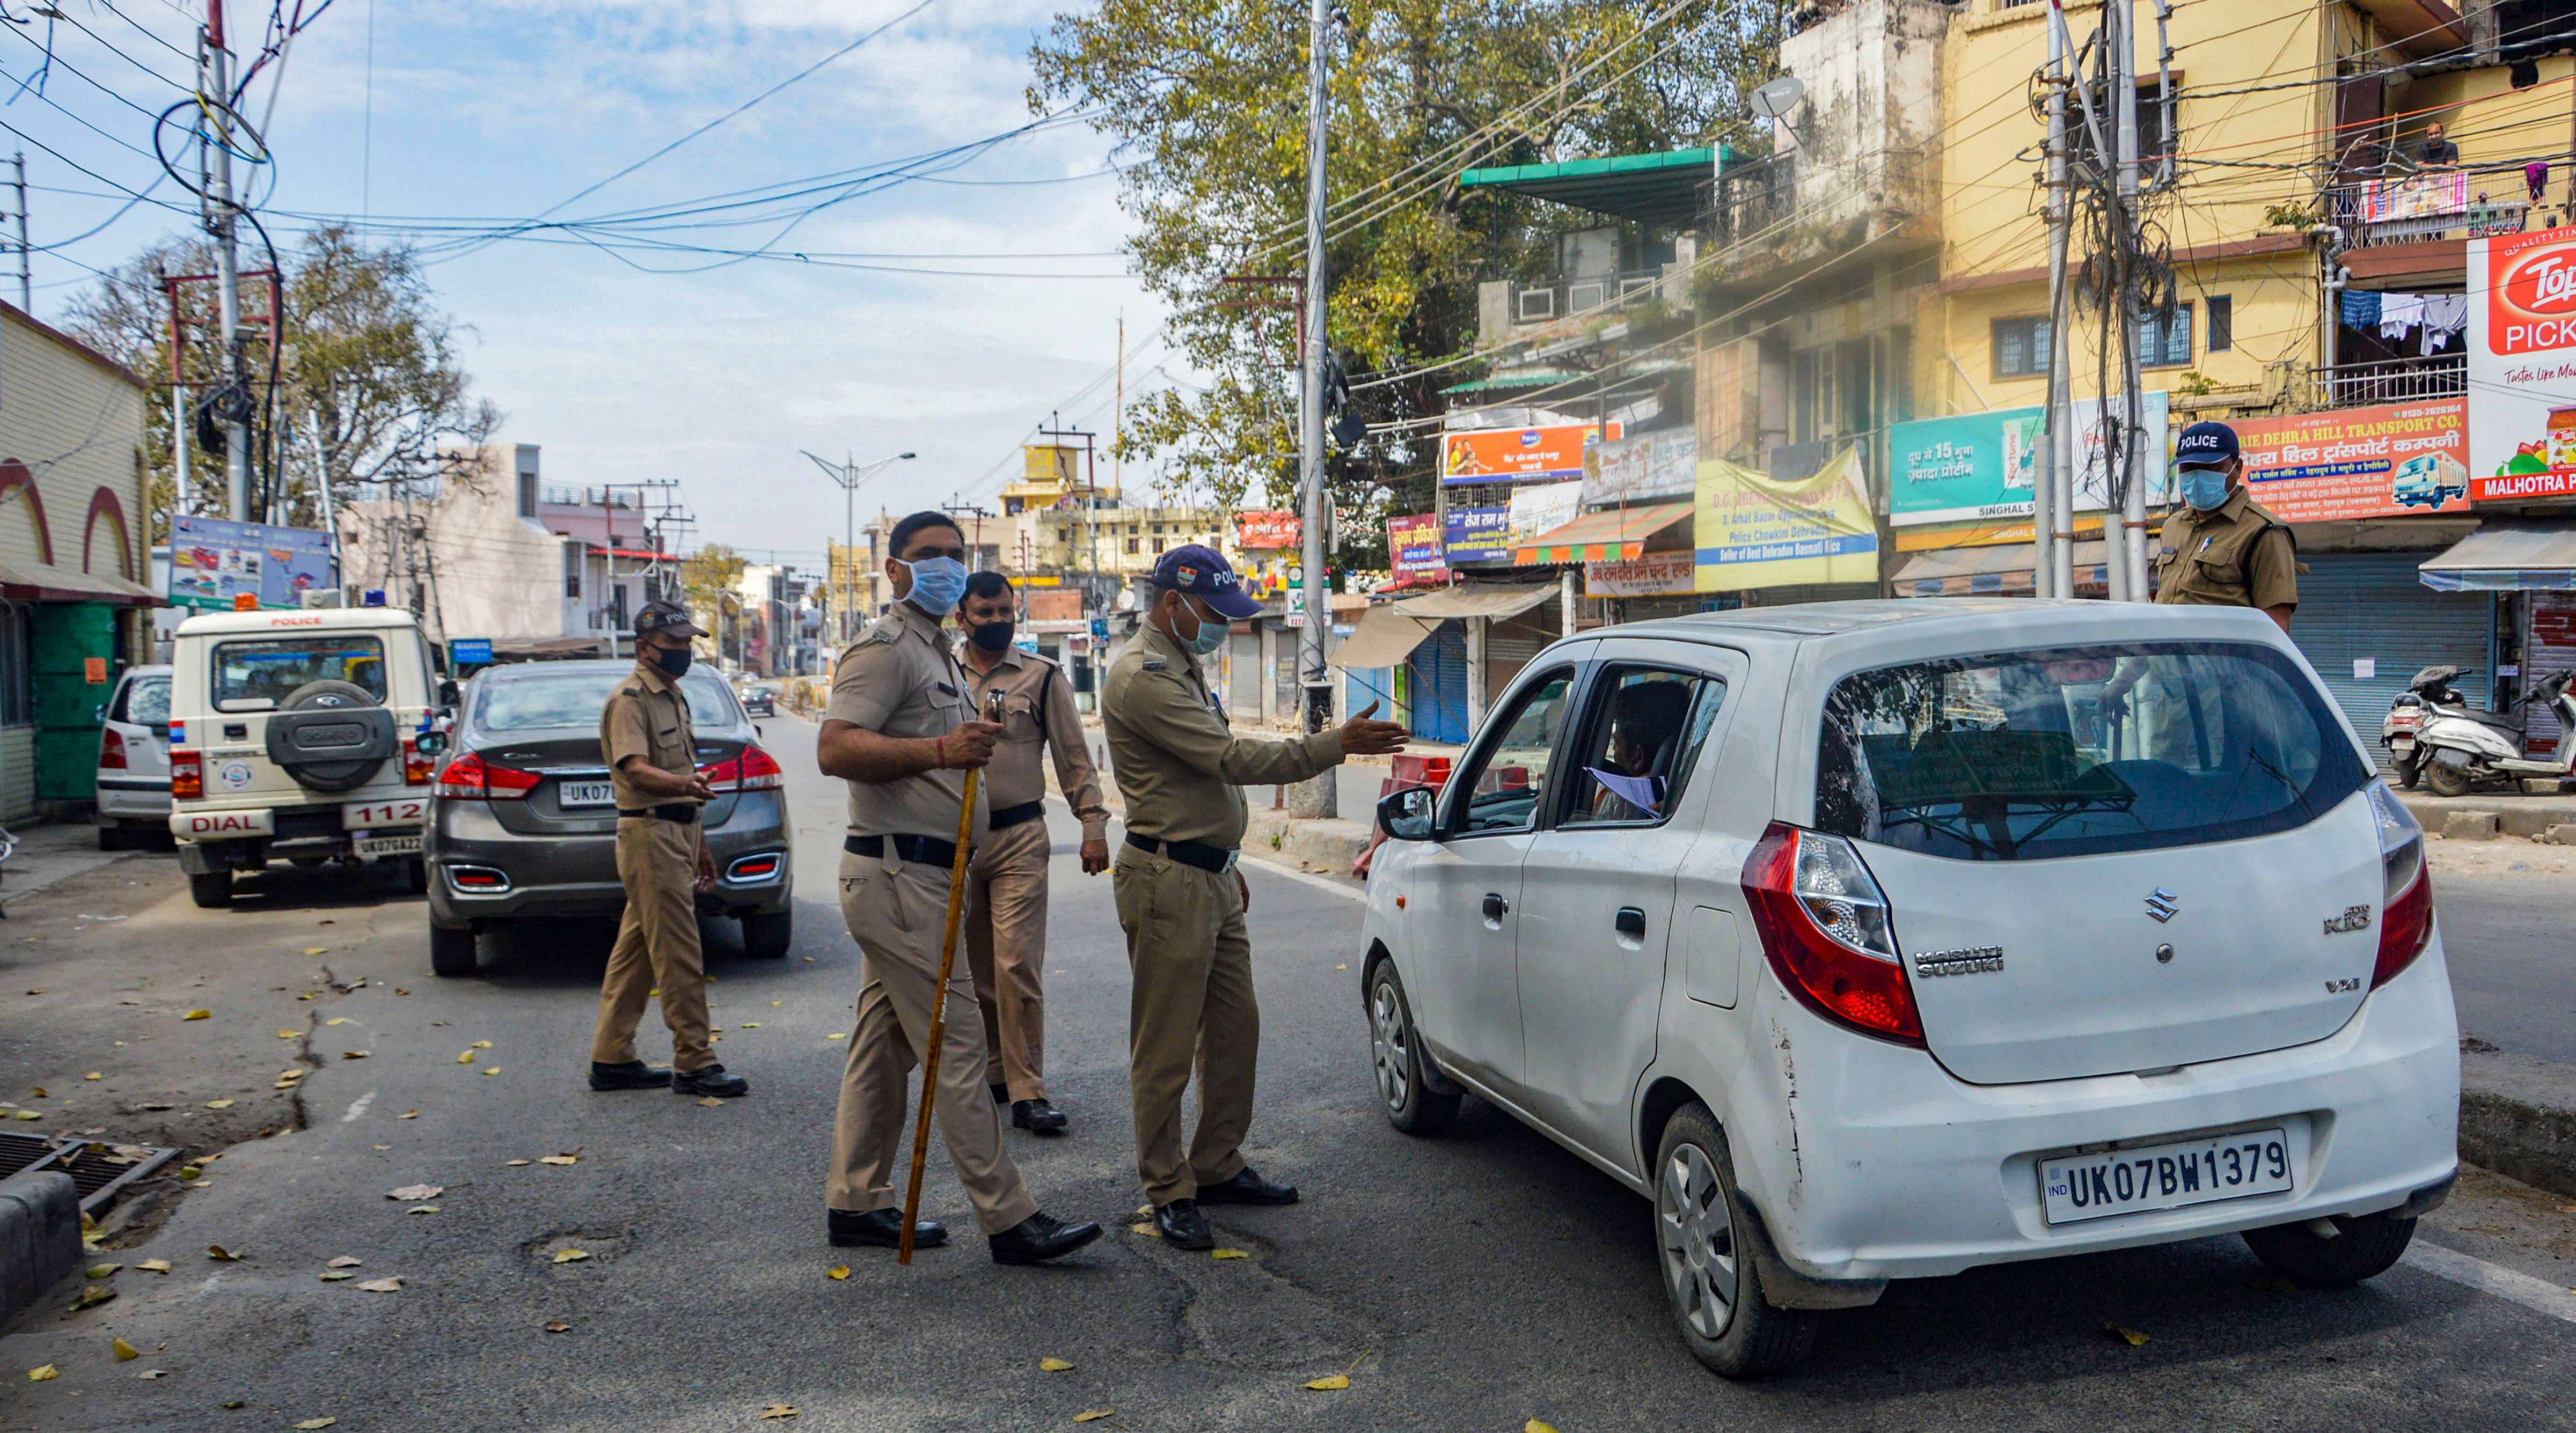 Police personnel stop commuters after the state government enforced lockdown in the city amid coronavirus pandemic, in Dehradun. (Credit: PTI)